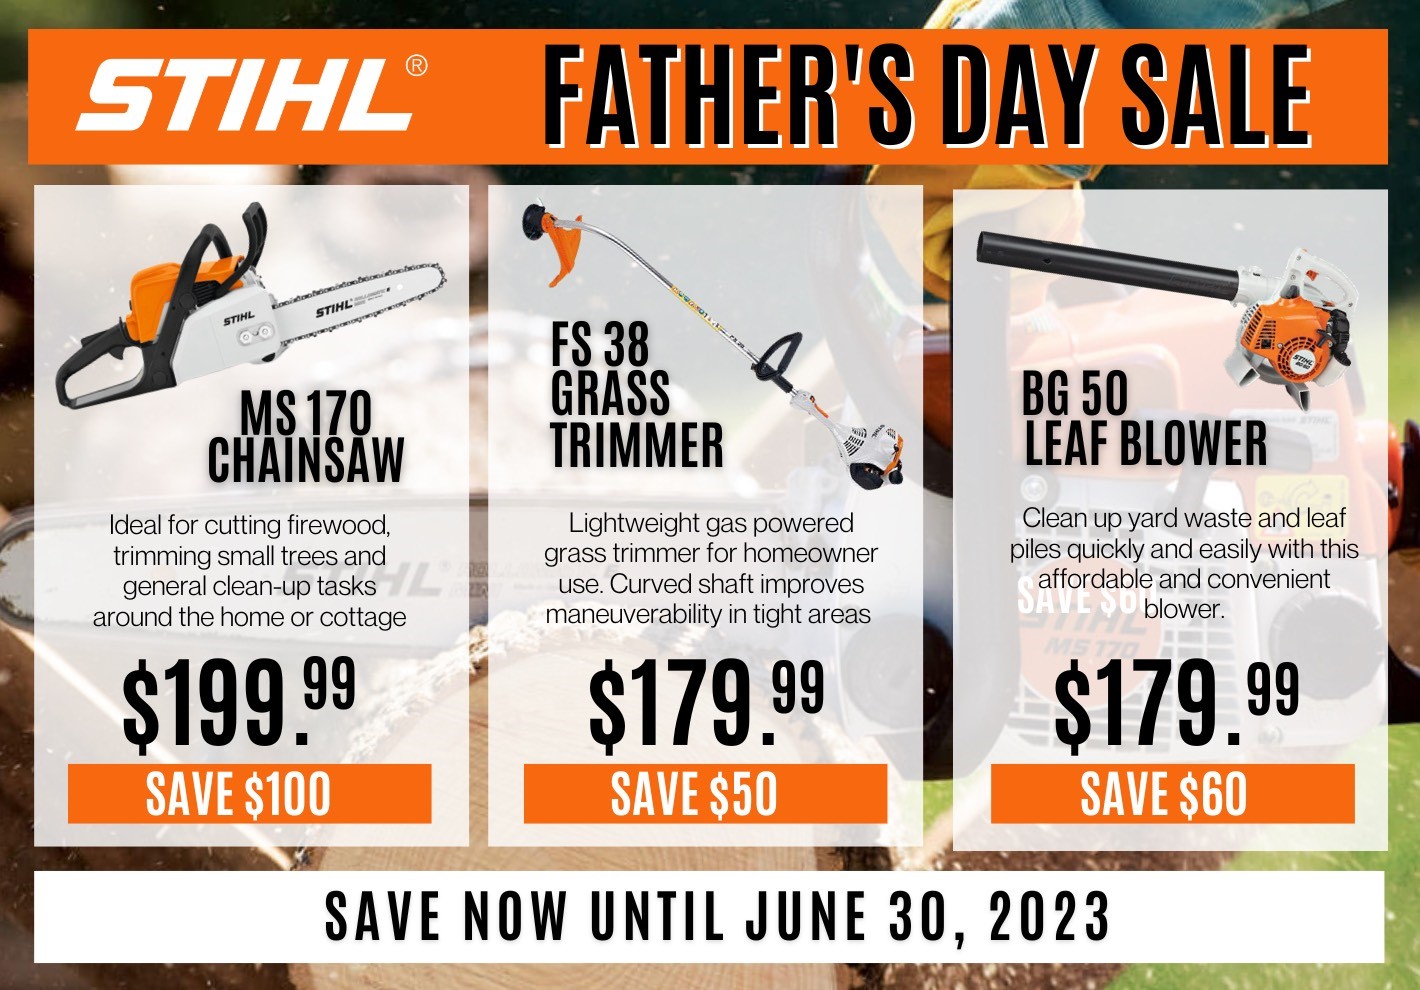 SHIHL Father’s Day Sale